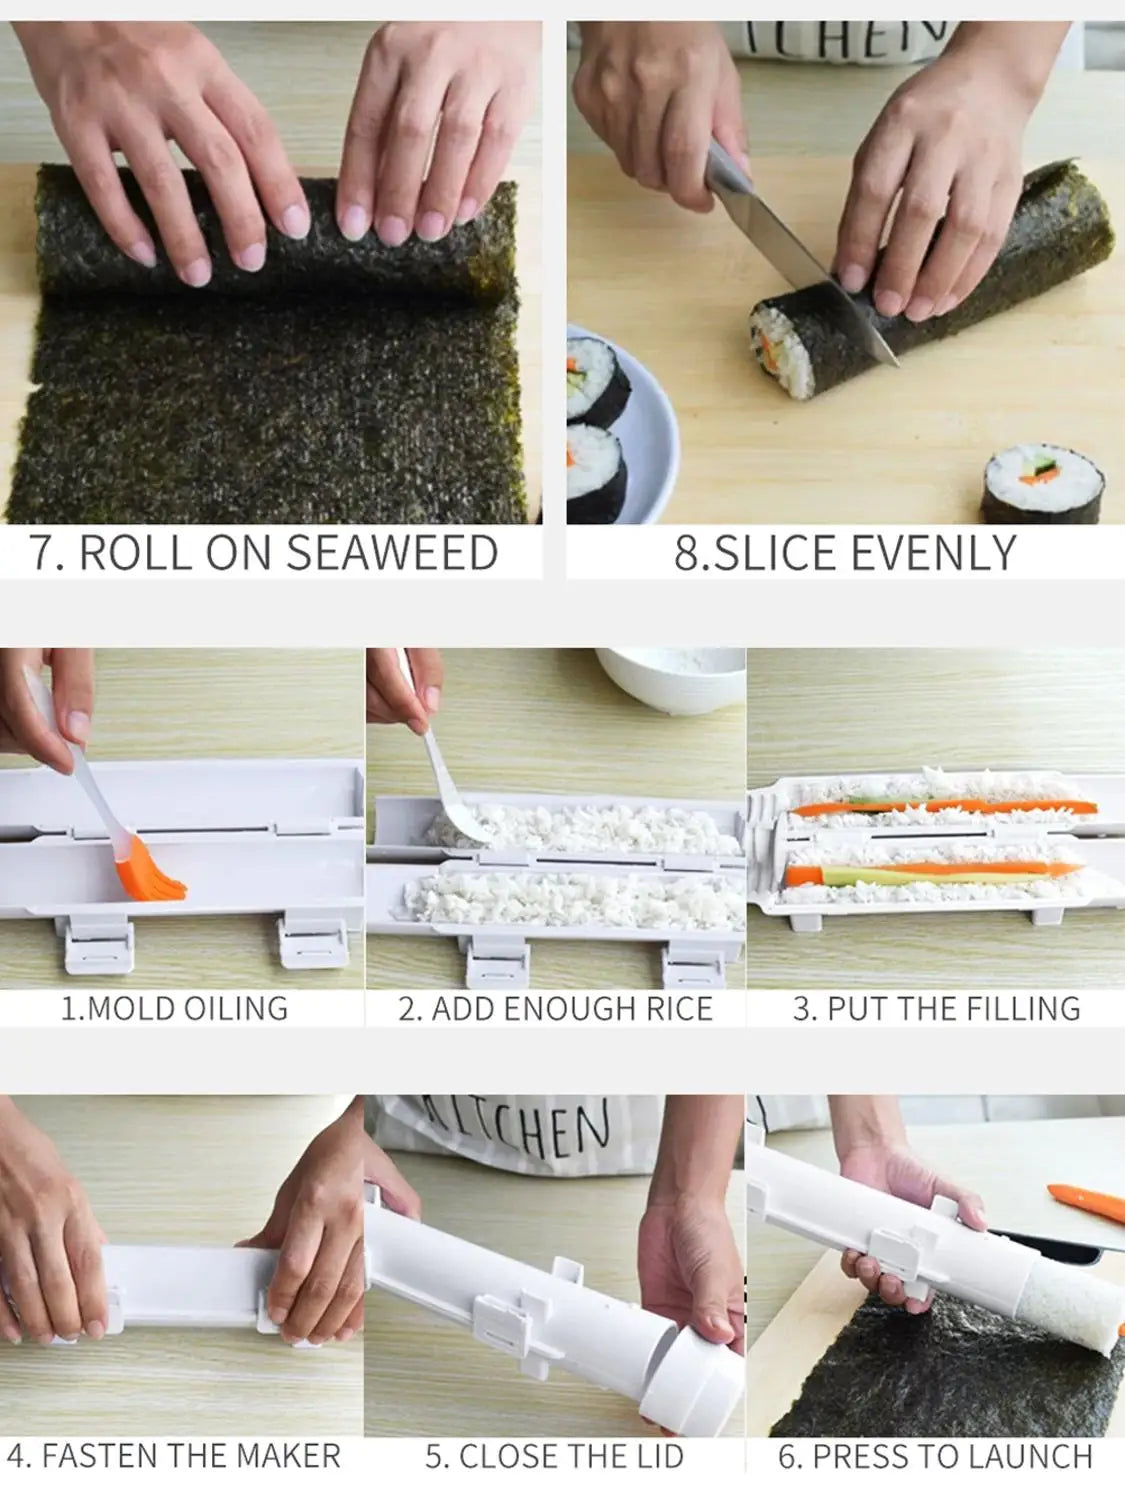 Sushi Maker Kit: Create Delicious Sushi Rolls with Ease Using Our Handy Rolling Gadget!